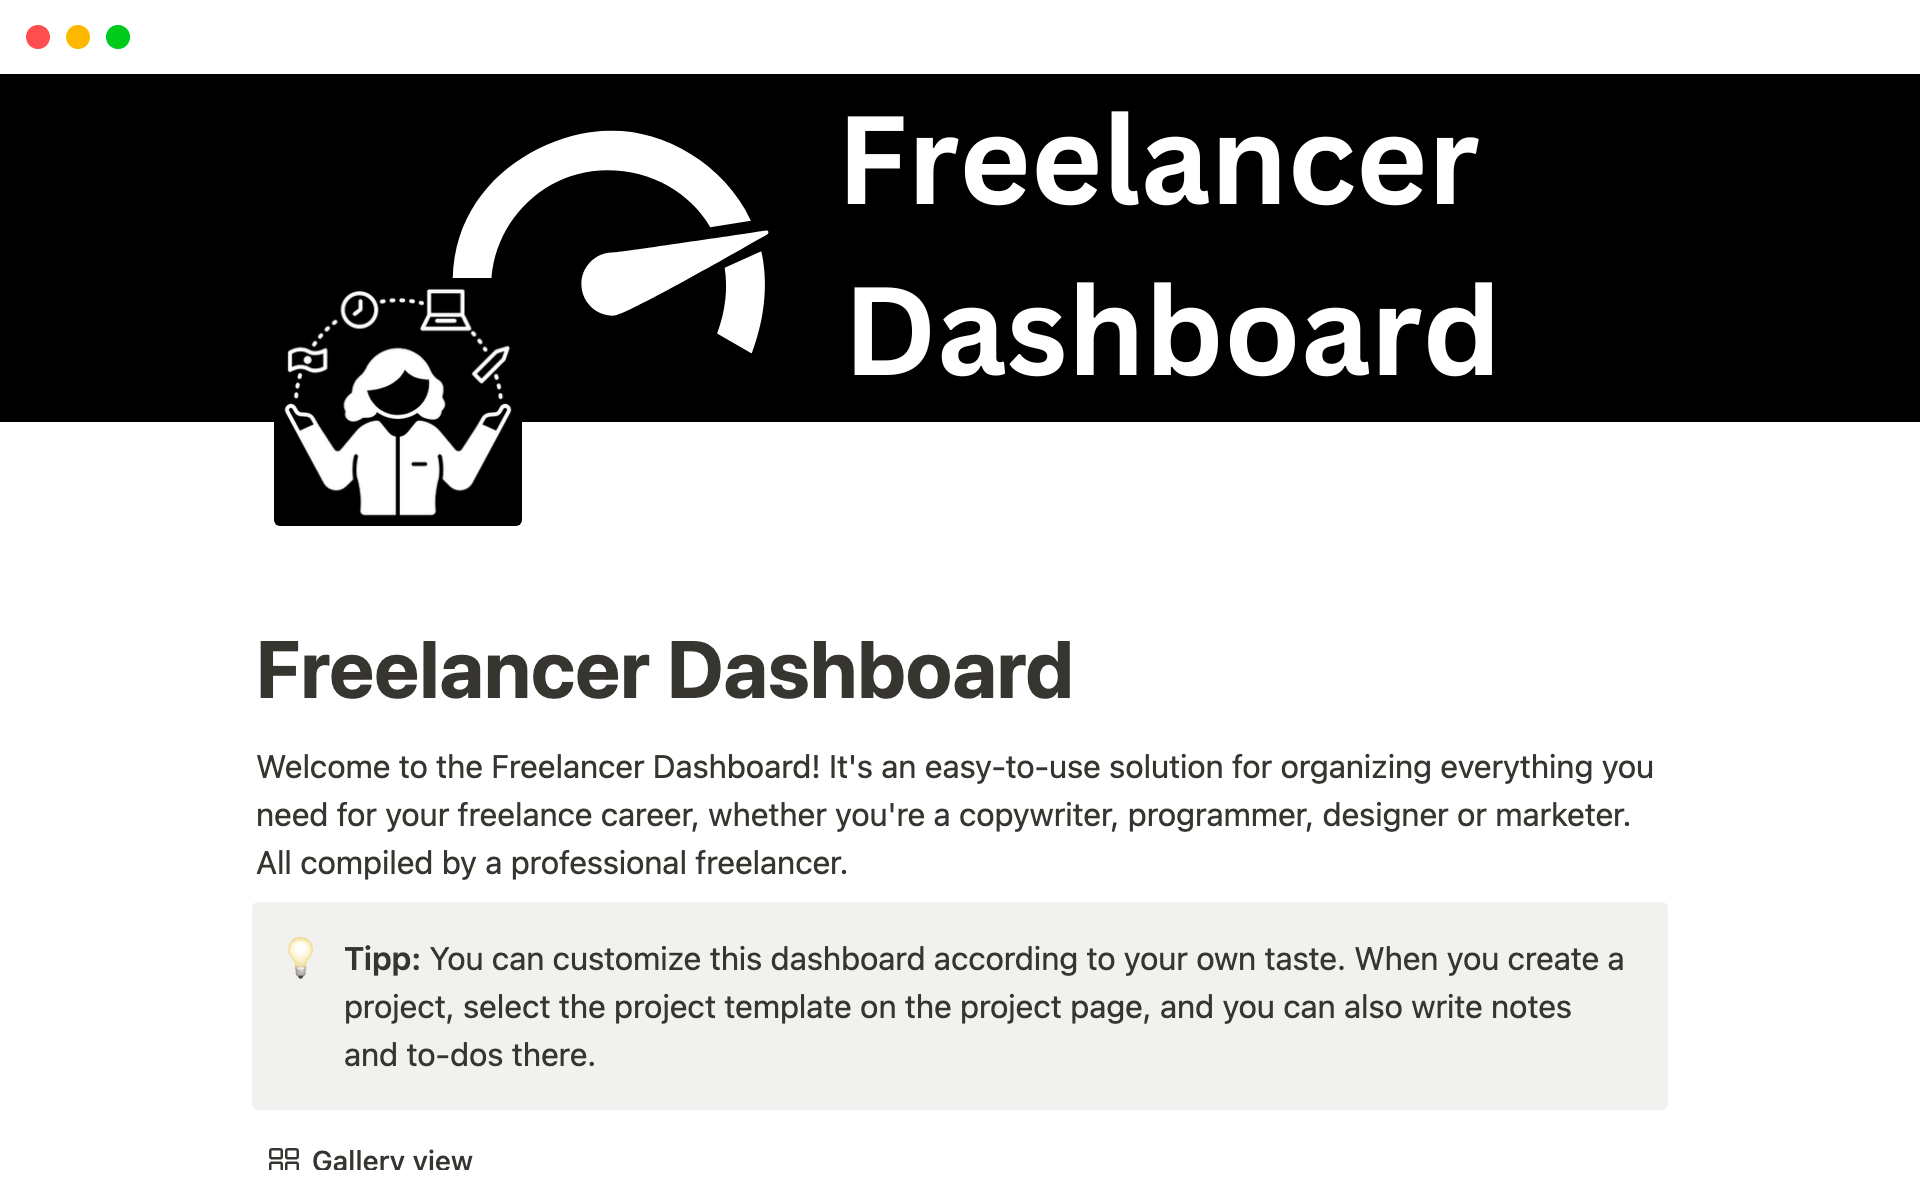 Are you a freelancer juggling multiple projects, clients, and financial tasks? Look no further! Our Freelancer Dashboard Notion template is designed to empower you with organization, efficiency, and control.